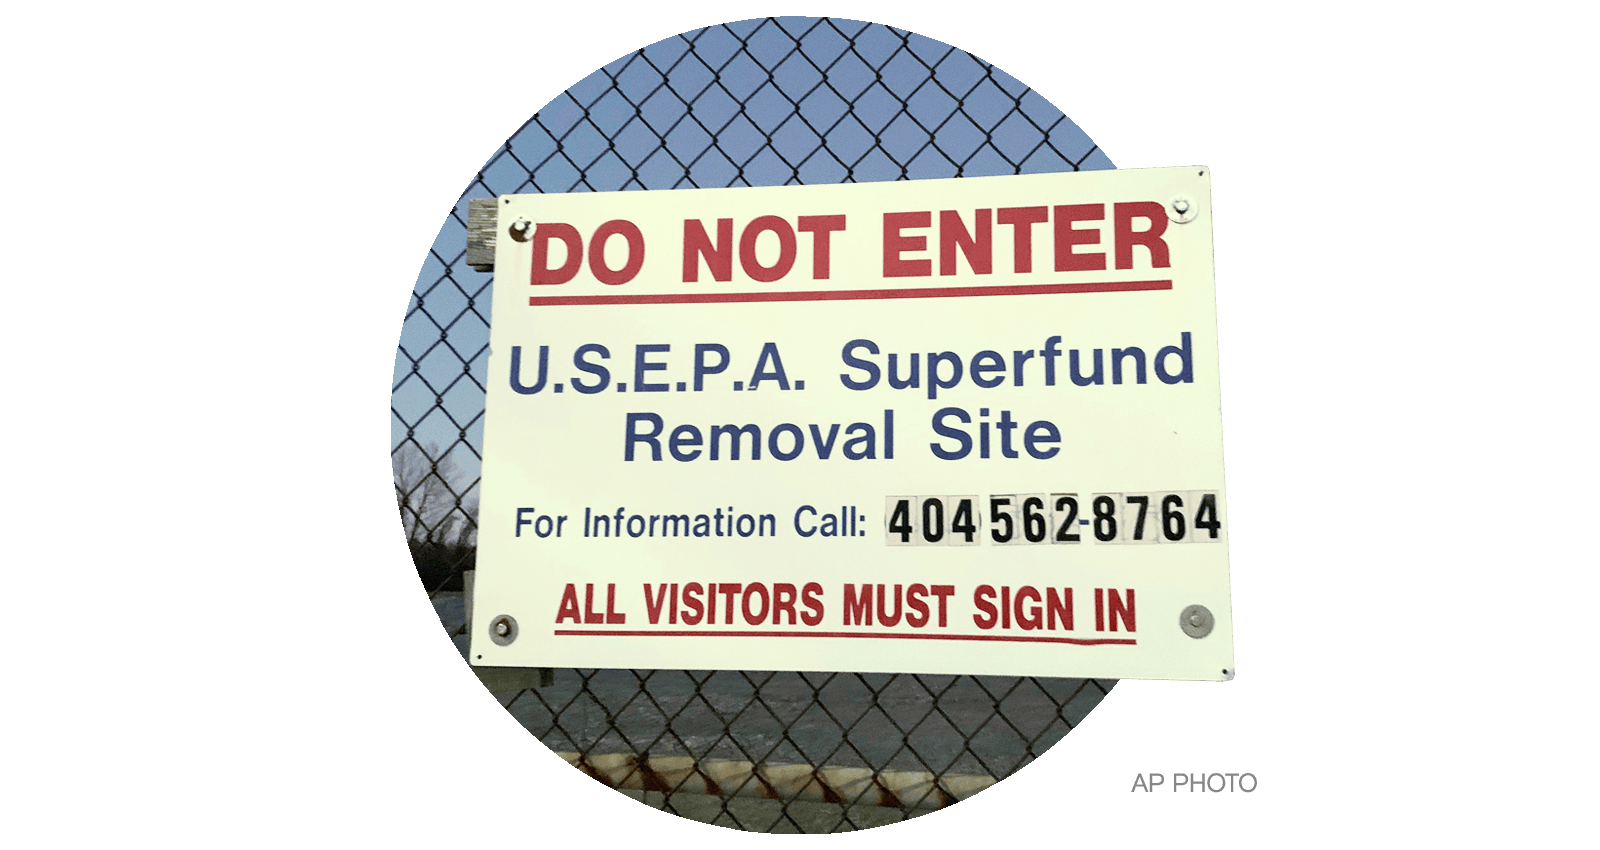 A sign identifies the Superfund removal site on the property of a former high school in Birmingham, Alabama